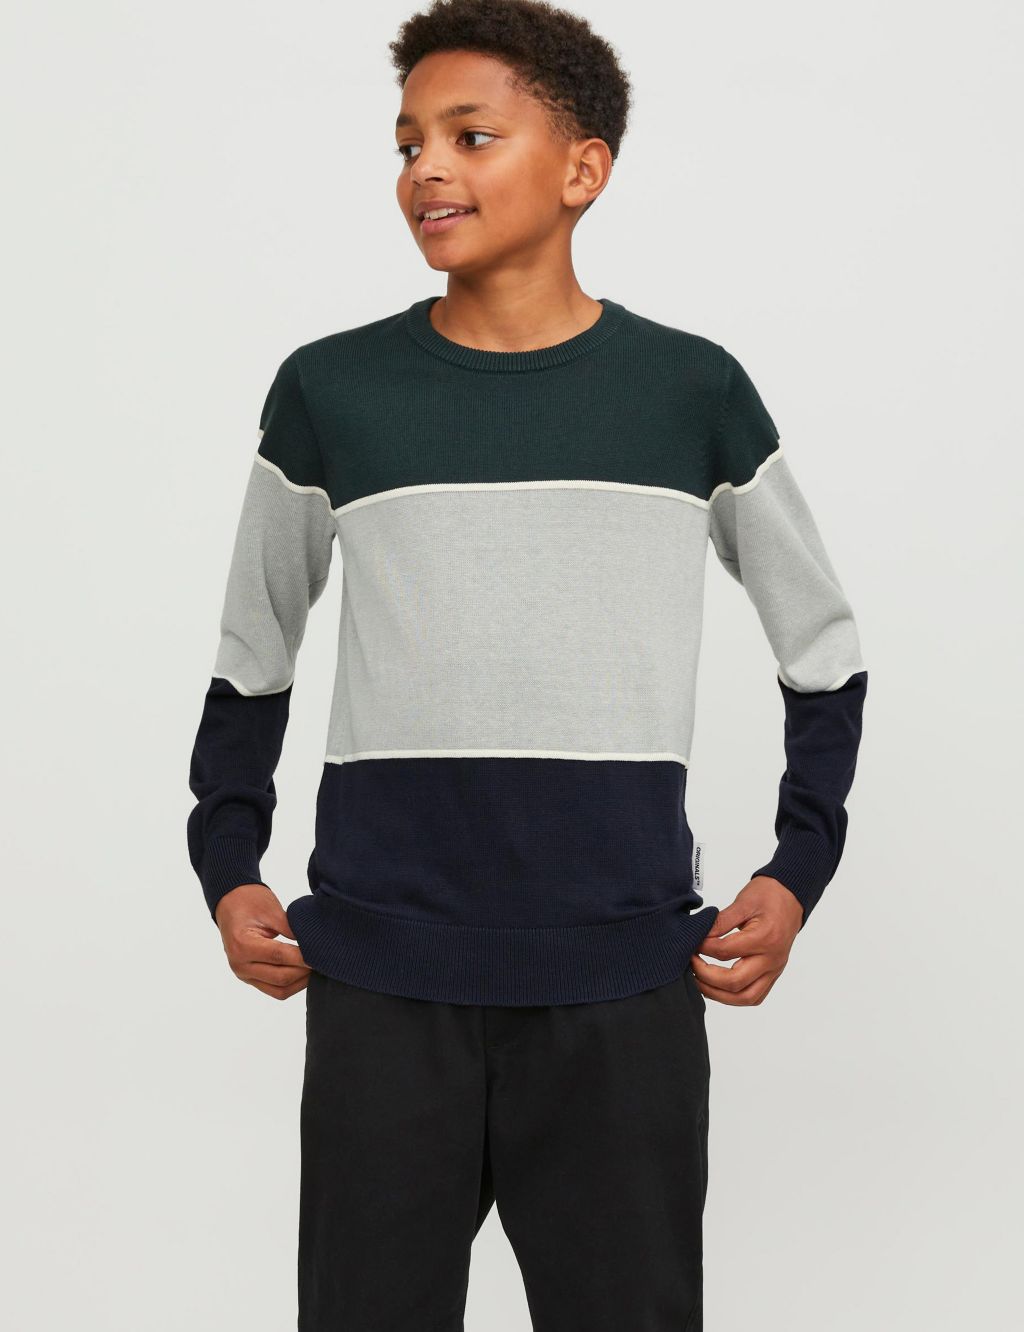 Cotton Blend Colour Block Knitted Jumper (8-16 Yrs) image 7